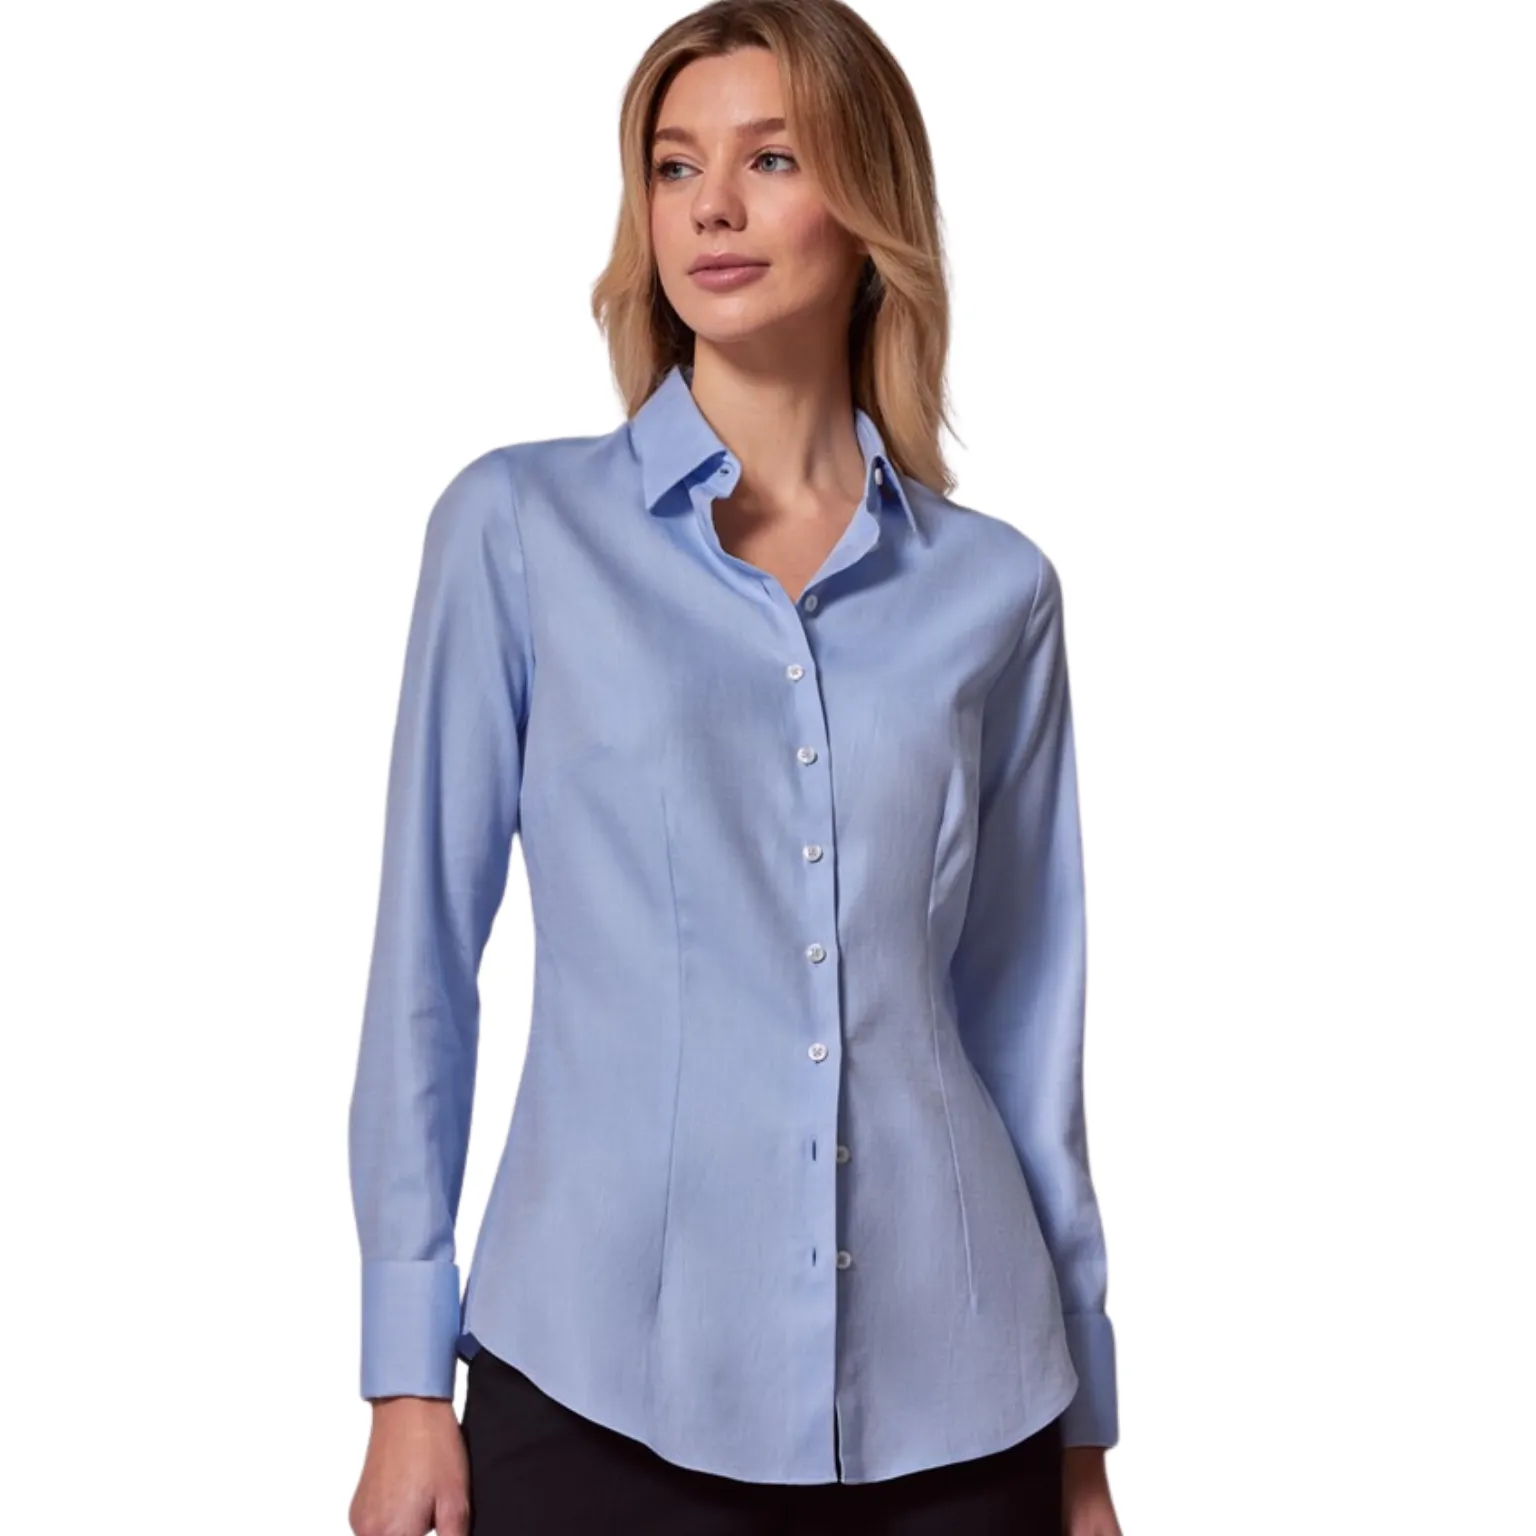 Twill Shirts Manufacturing with sustainable solutions